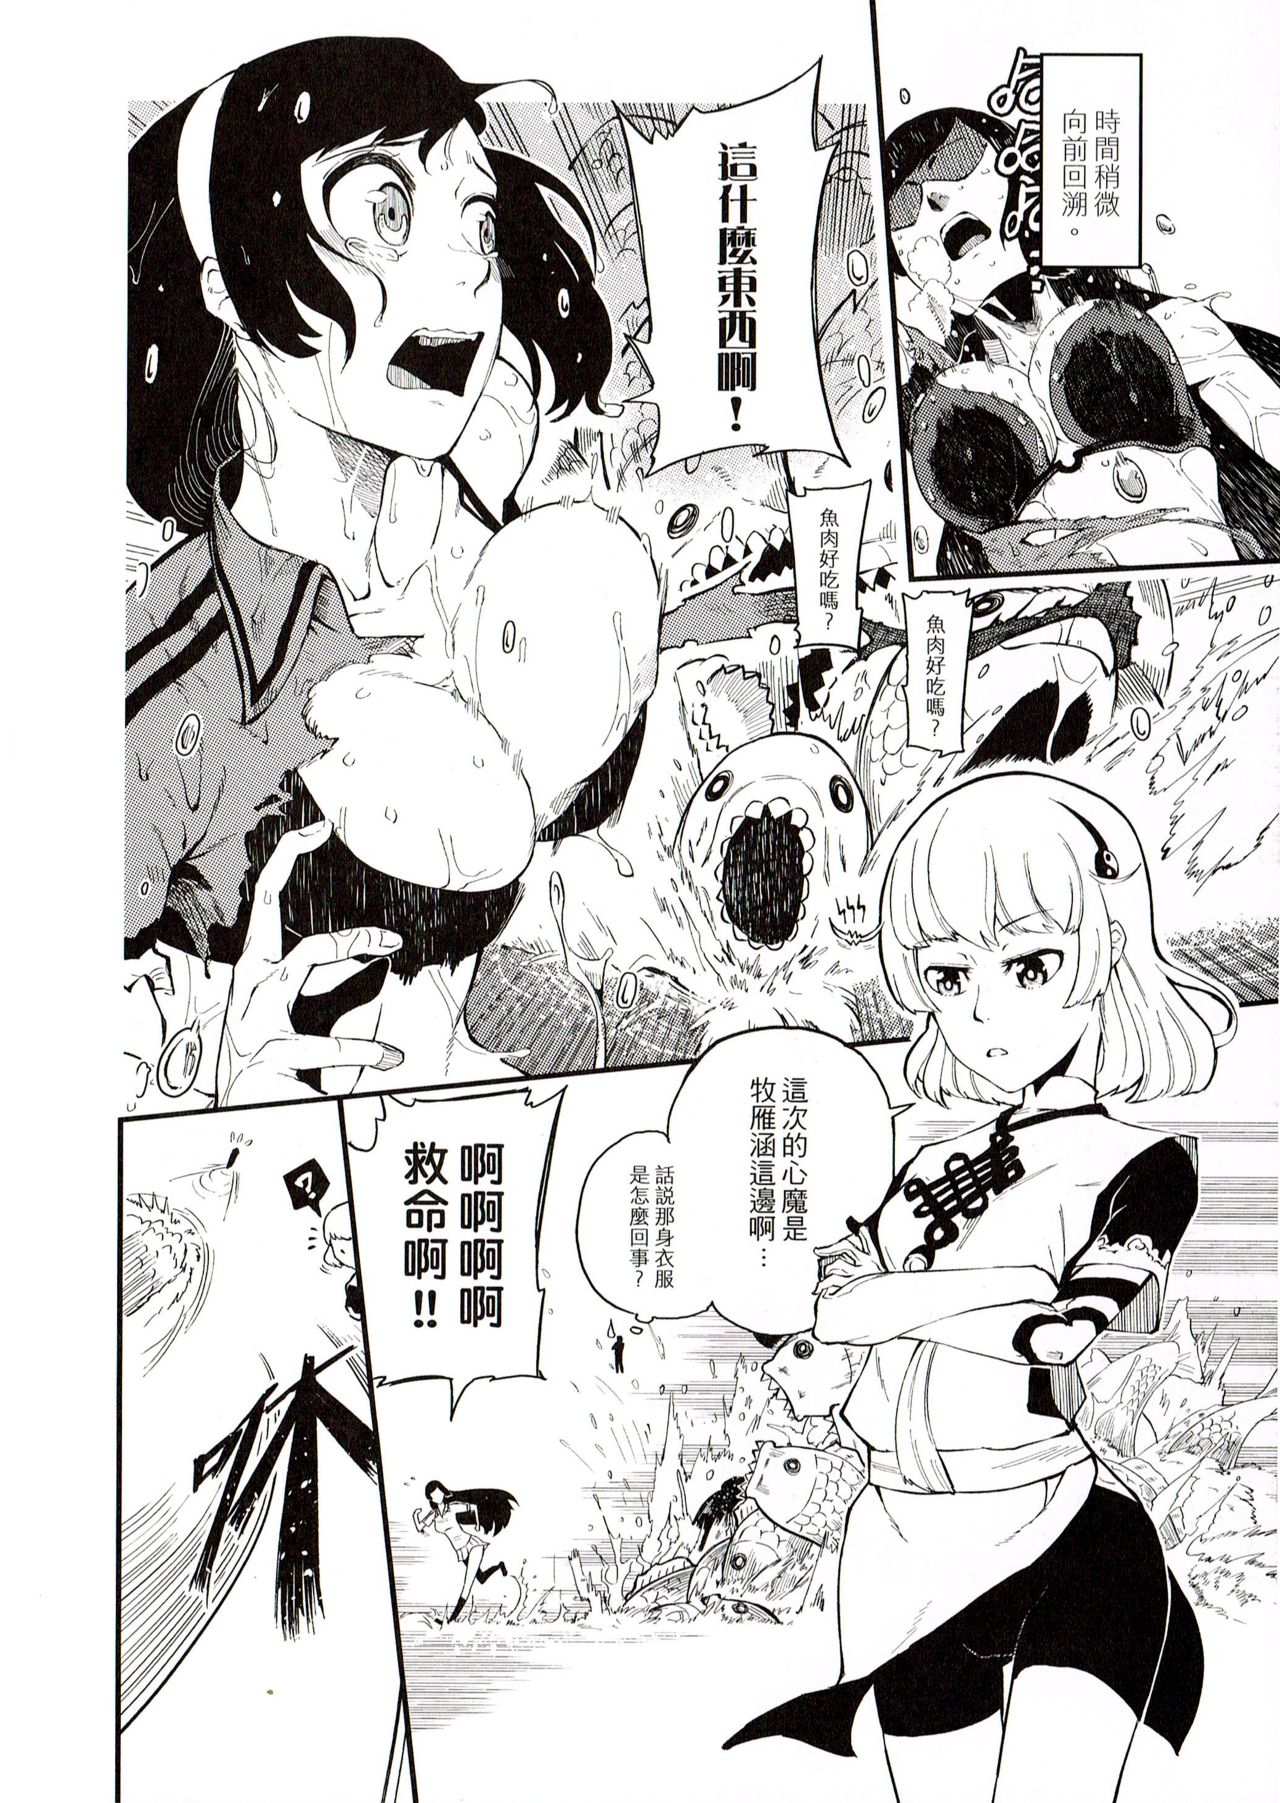 (FF28)  [Coin]  Do not worry!! There's not have any sacrilegious in this Dōjinshi!! [Chinese] (FF28)  [Coin]  安心！！不會天譴的天譴本！！ [中国語]